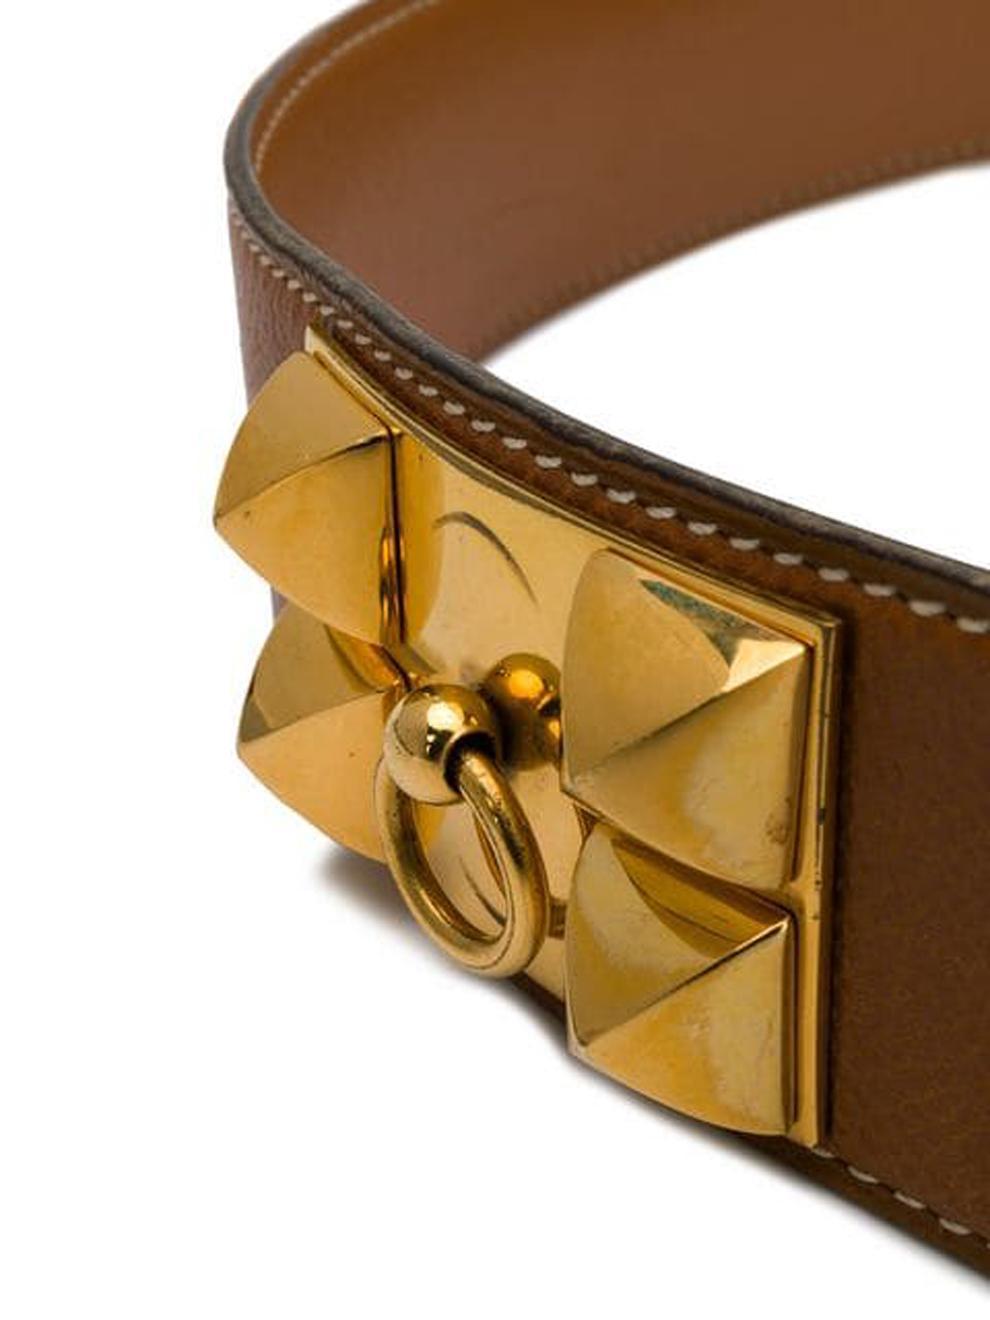 Gorgeous camel calfskin leather Hermès and  gold-plated stud detail belt featuring gold-plated hardware and an internal logo stamp, with gold-plated Collier de Chien buckle.
Width: 1,5in. (4cm)
Maxi Length: 28.3in. (72cm)
In good vintage condition.